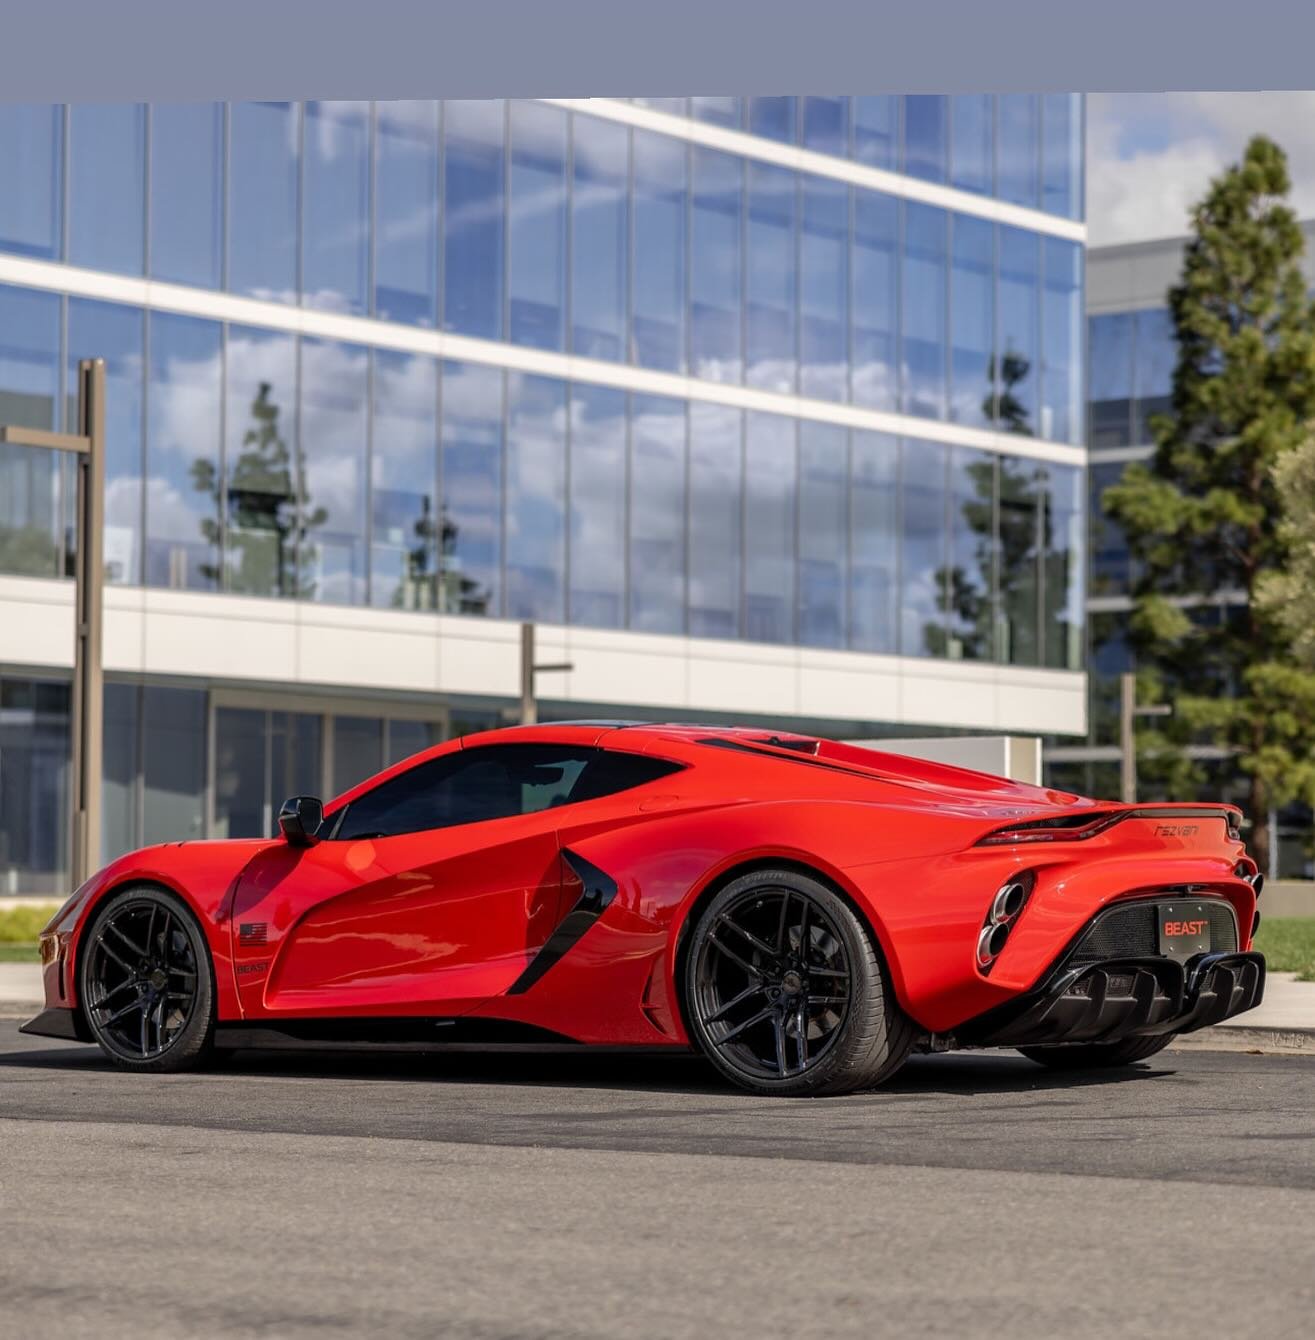 Can you tame the all new 2024 REZVANI BEAST?  1,000 HORSEPOWER

0-60 MPH IN 2.5 SECONDS

CARBON FIBER BODY

LIMITED TO 20 EXAMPLES

STARTING AT $485,000 #rezvanimotors #rezvanibeast #supercars #hypercar #sportscar #carswithoutlimits #corvette #fastca